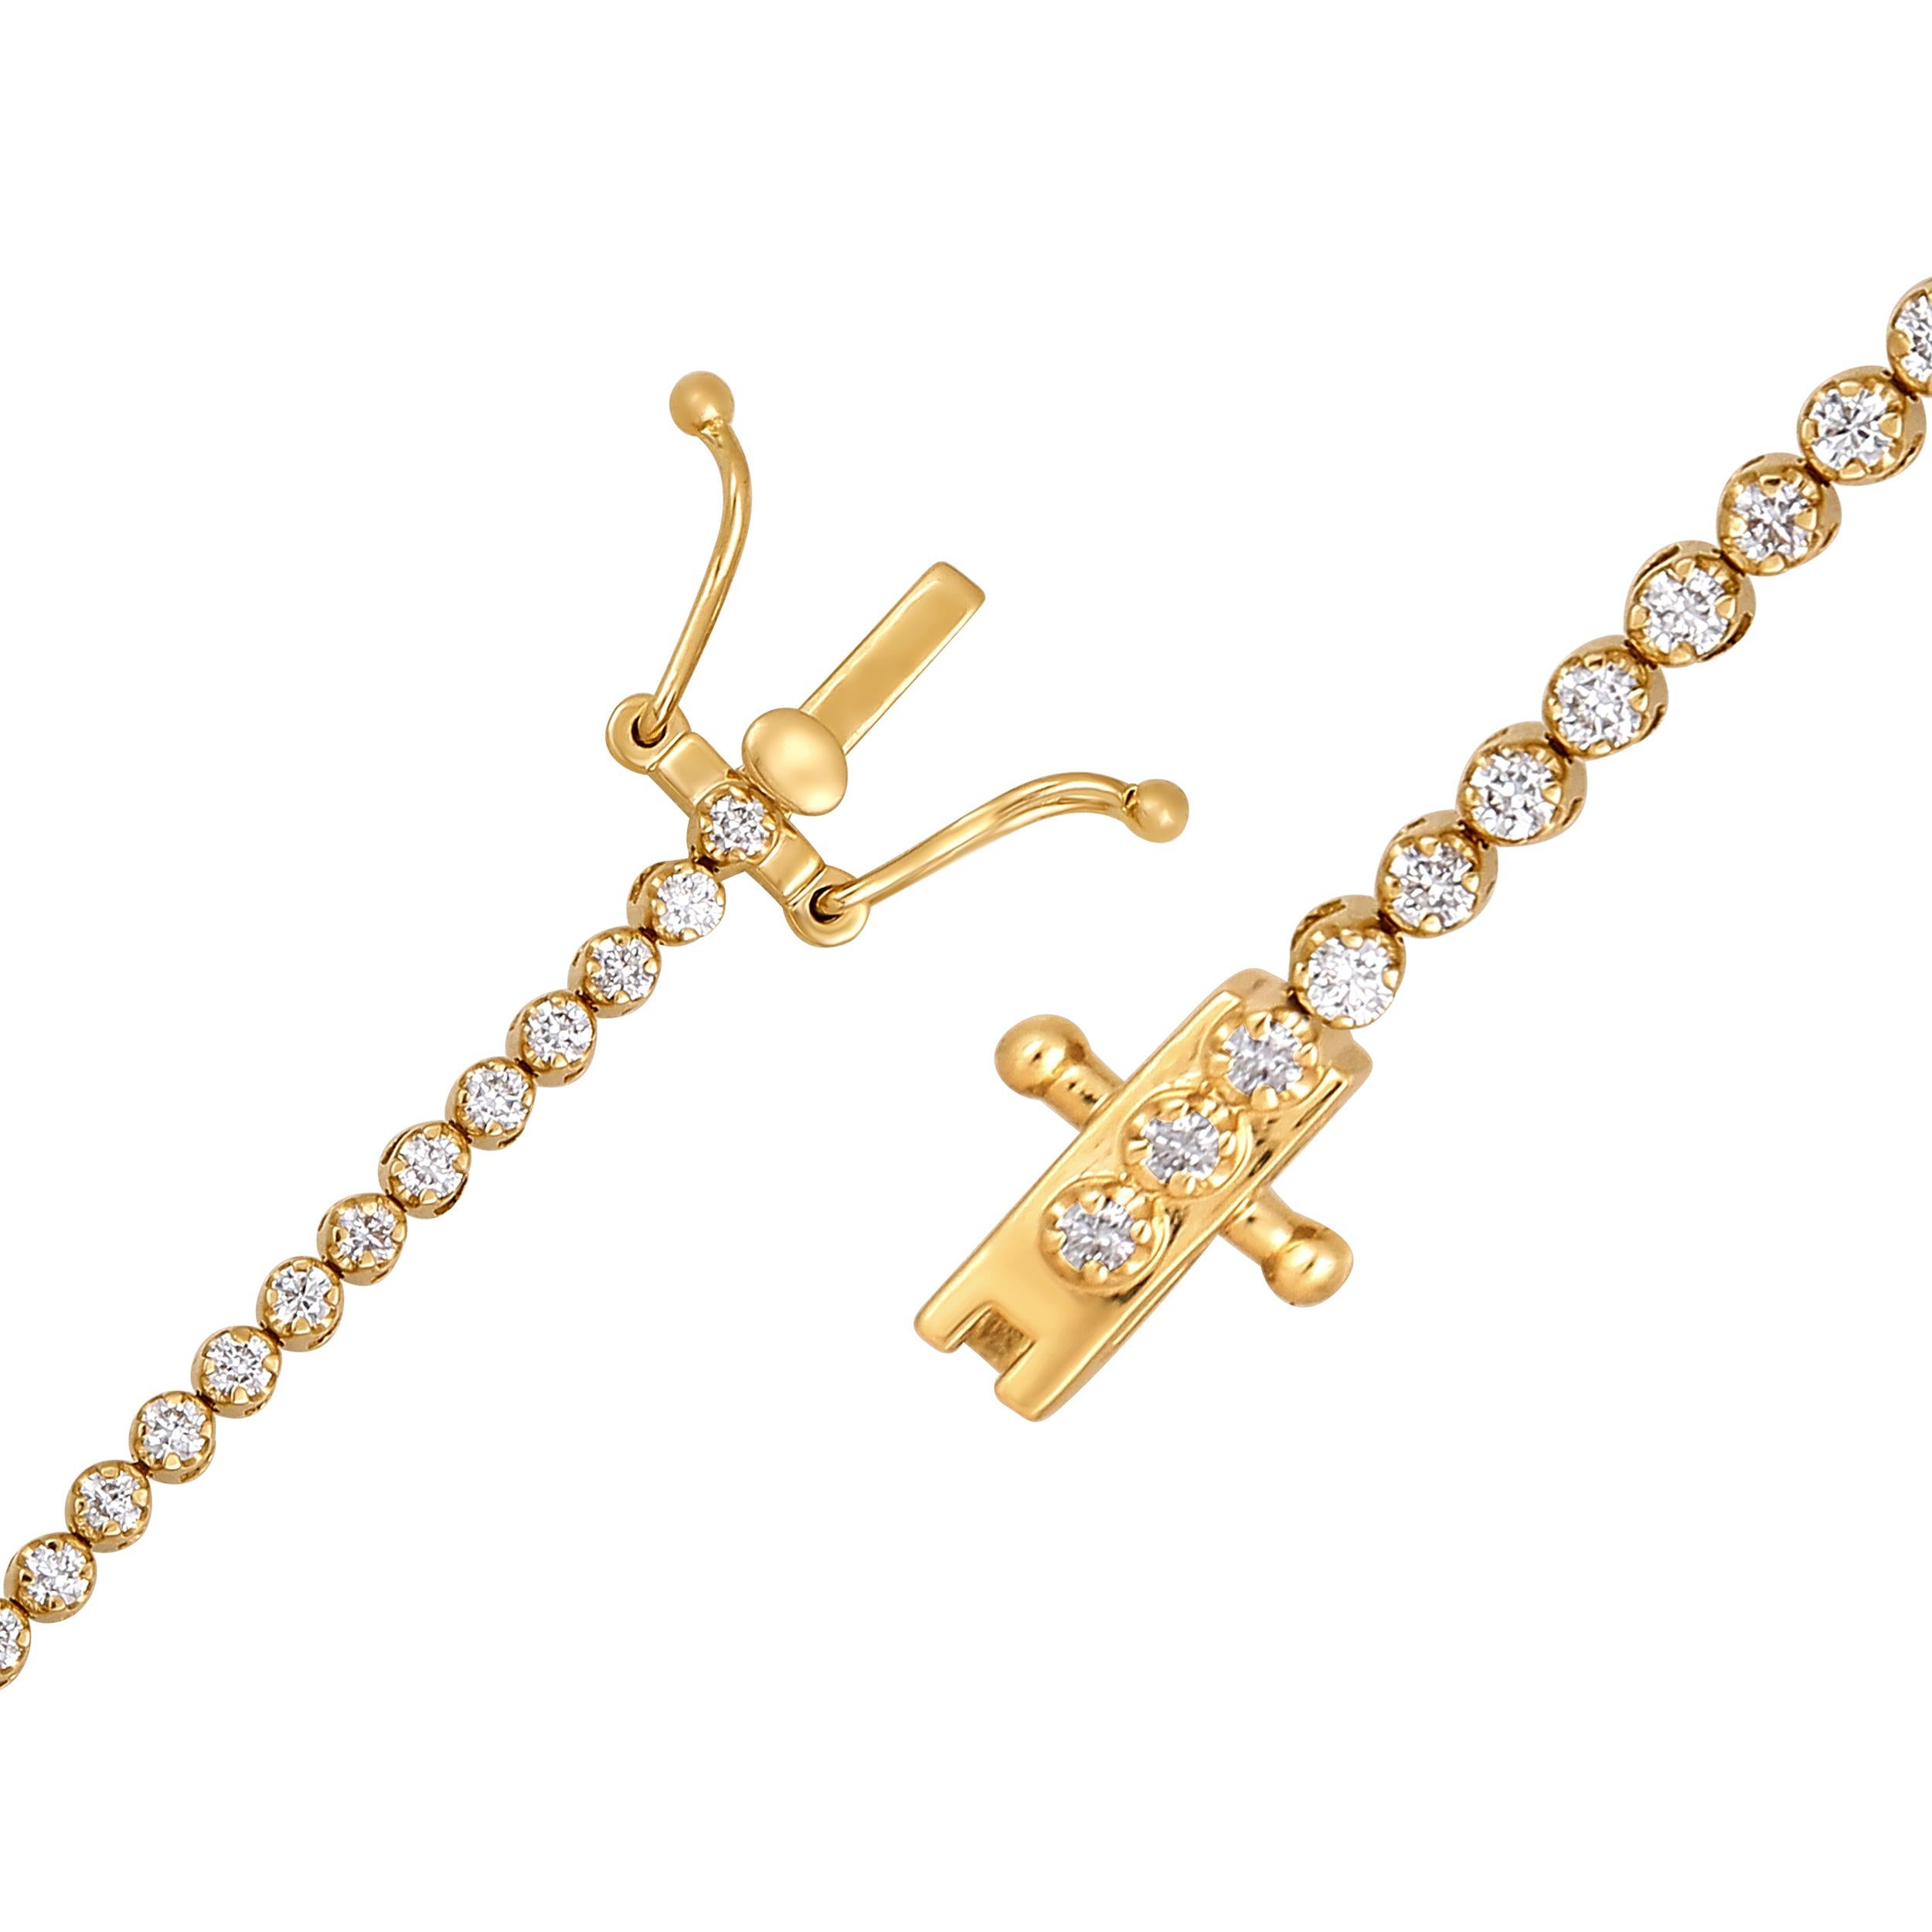 Crafted in 5.13 grams of 14K Yellow Gold, the bracelet contains 66 stones of Round Natural Diamonds with a total of 0.97 carat in F-G color and VS clarity. The bracelet length is 7 inches.

This jewelry piece will be expertly crafted by our skilled